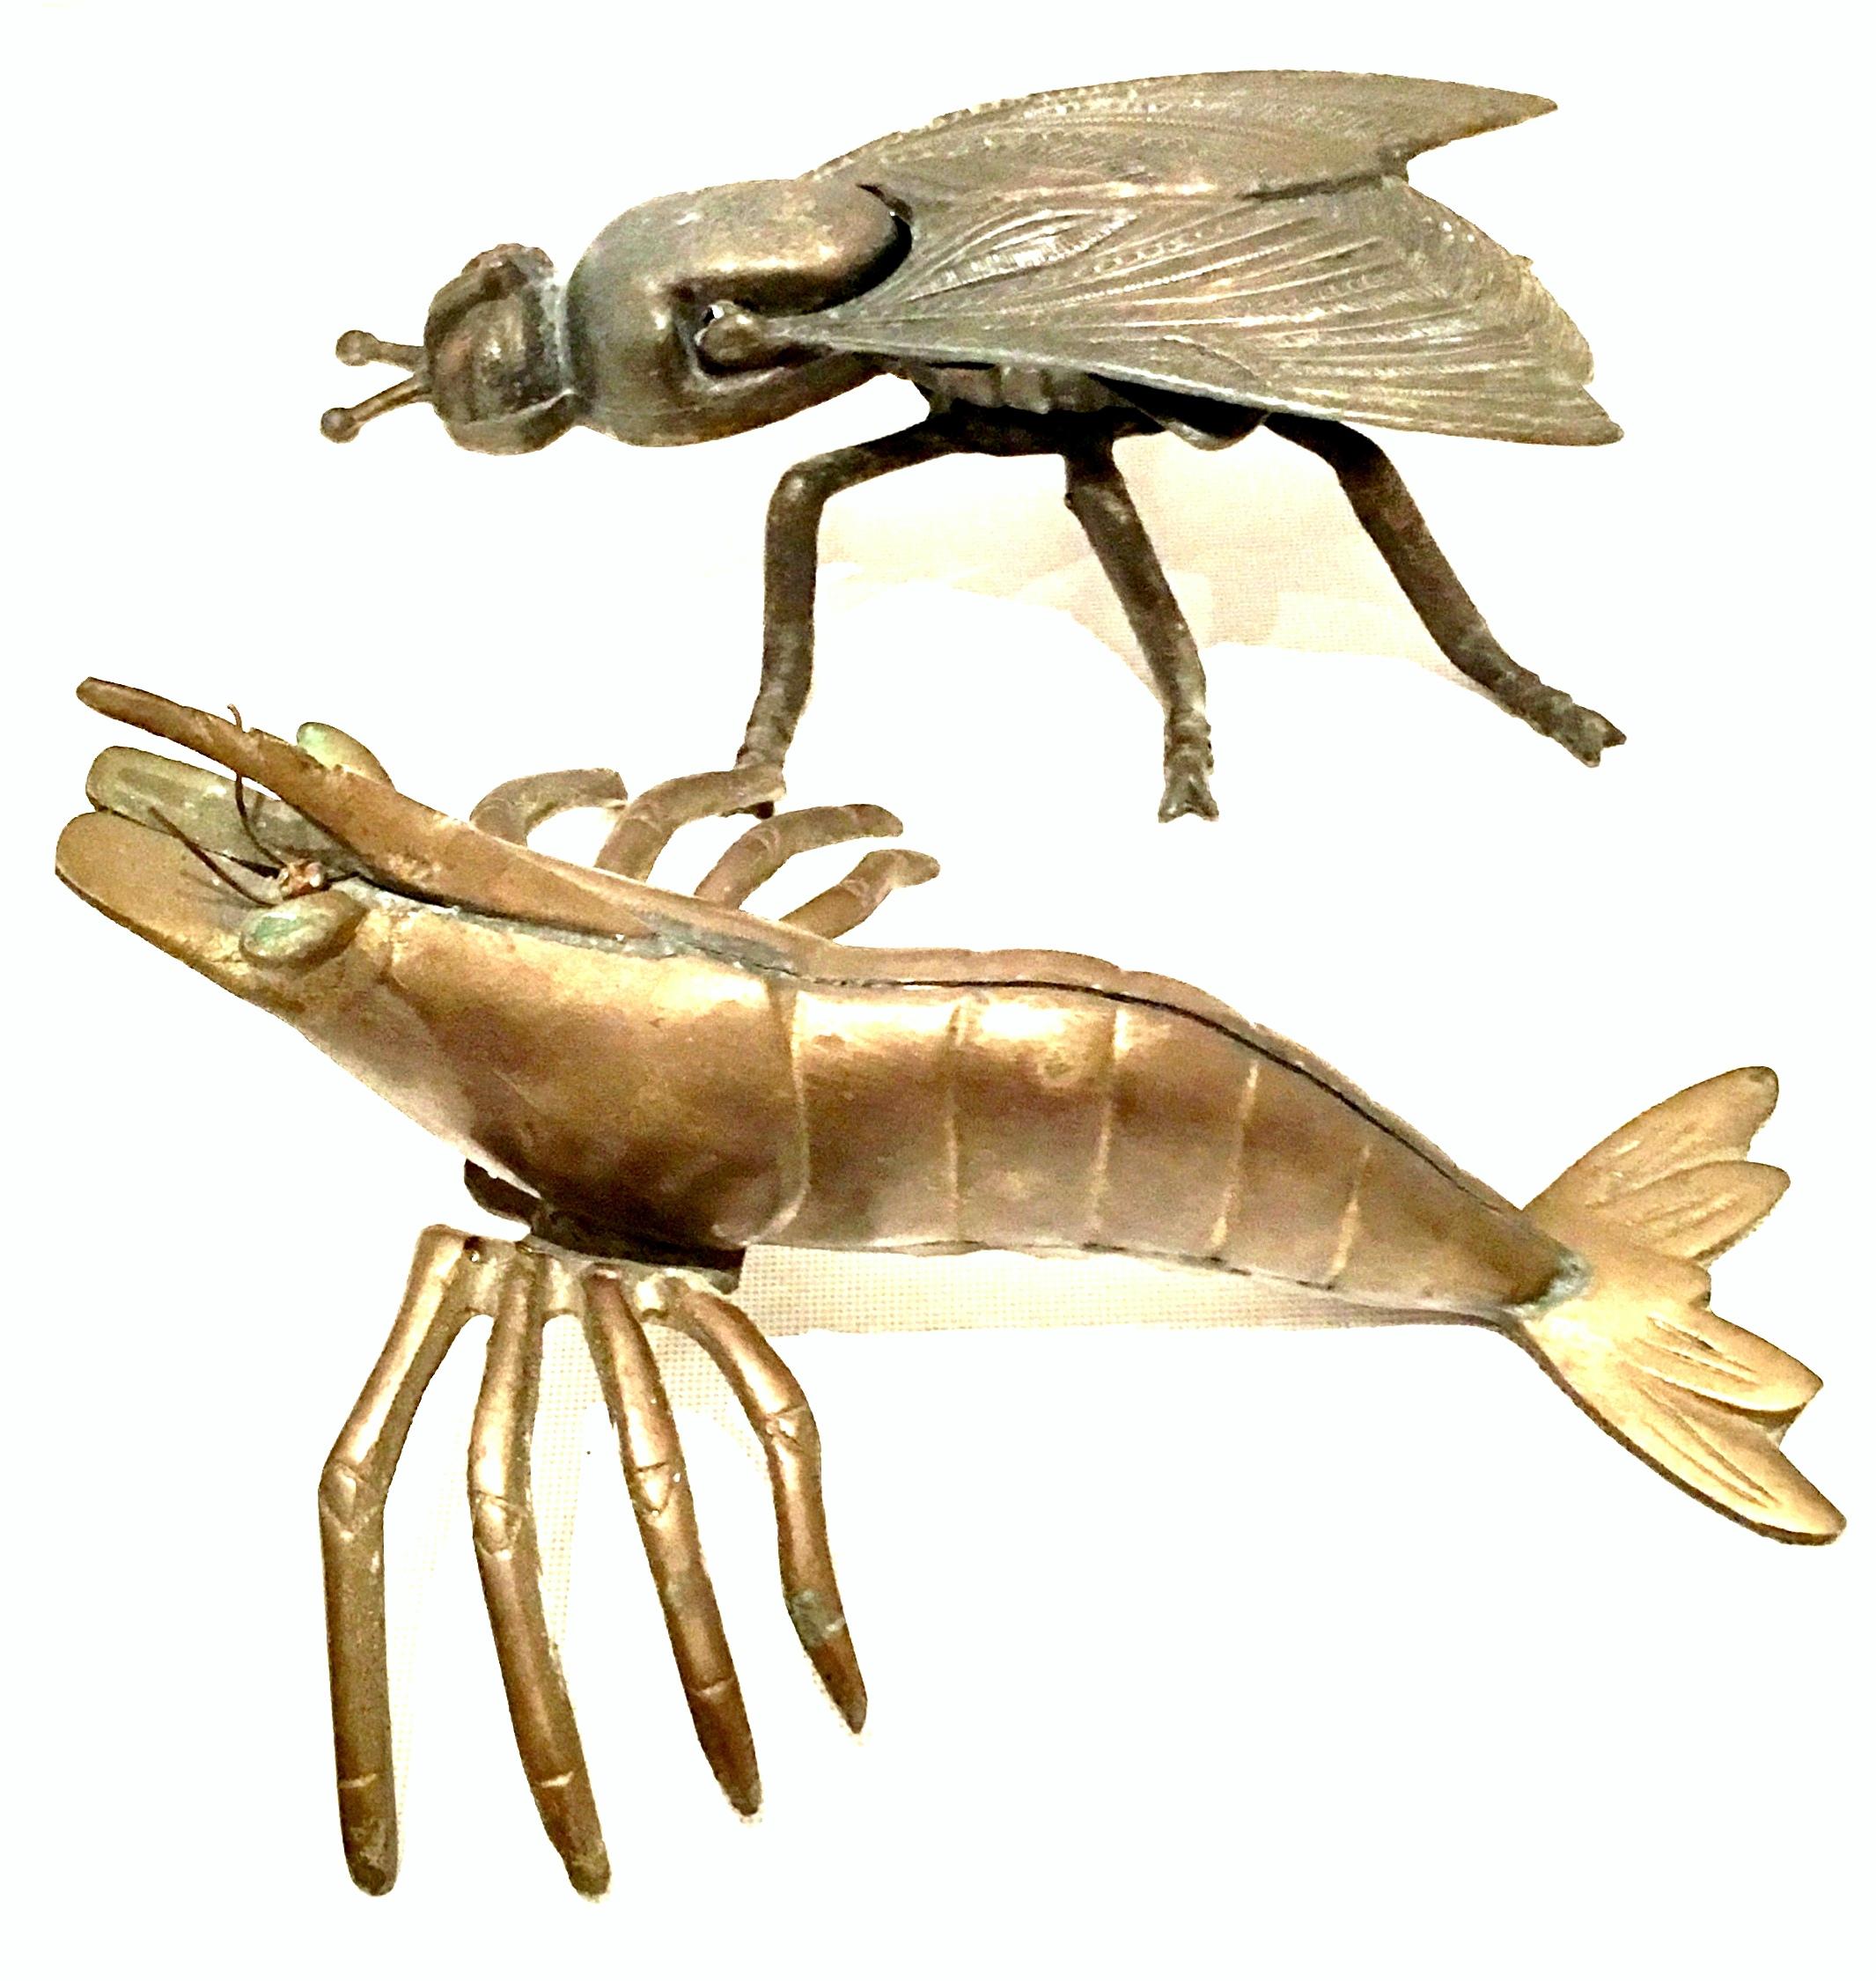 Mid-20th century Art Nouveau pair of iron and brass figural fly and Shrimp Sculptures. The Fly box made of cast iron features a hinged lid. The weighted brass shrimp features attached legs and wire articulating eye detail.
The hinged fly box